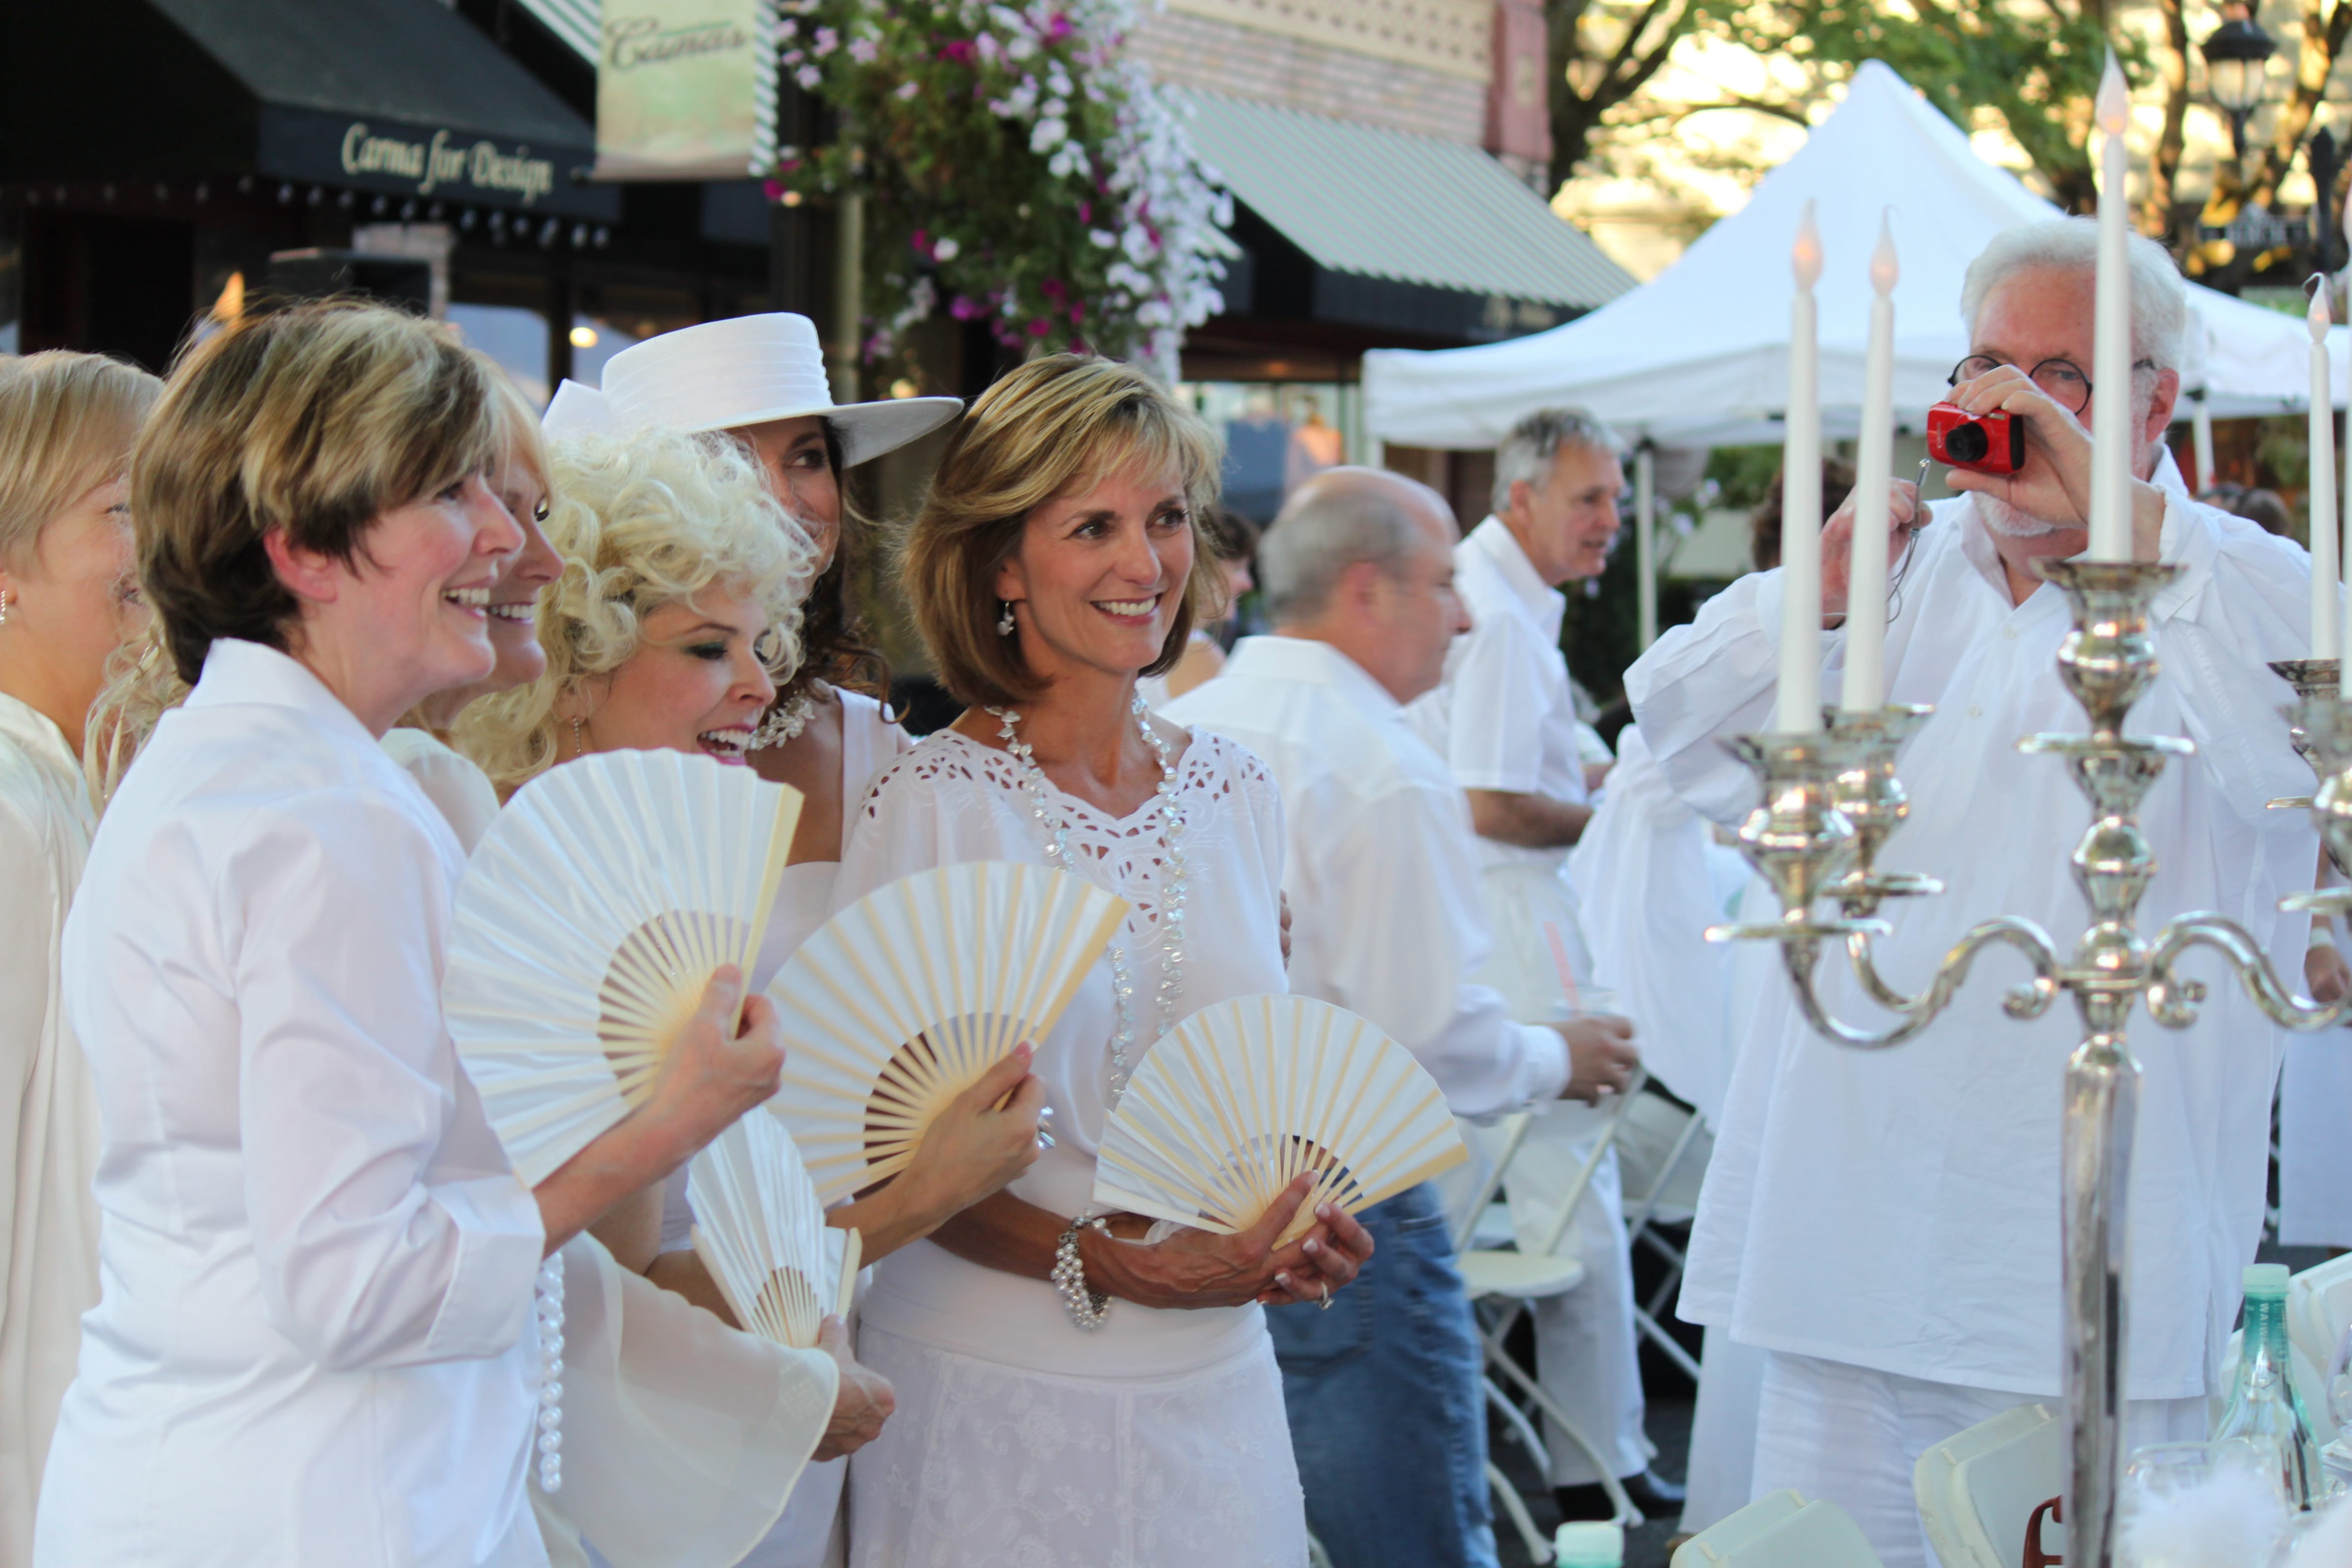 More than 150 people attended the &quot;Camas in White, Dinner on Fourth Avenue&quot; event on Saturday evening in downtown. Attendees dressed in white outfits and dined at tables decorated in white color themes. This group of friends, many of whom are neighbors in the Lacamas Shores area, pose for pictures before dinner begins. The event was a fundraiser for the Camas-Washougal Mural Project. Through an auction of five art pieces, approximately $2,215 was raised, including a $1,400 winning bid by Capstone Technology Corp. for a  painting of the Camas mill by local artist Maria Grazia Repetto.